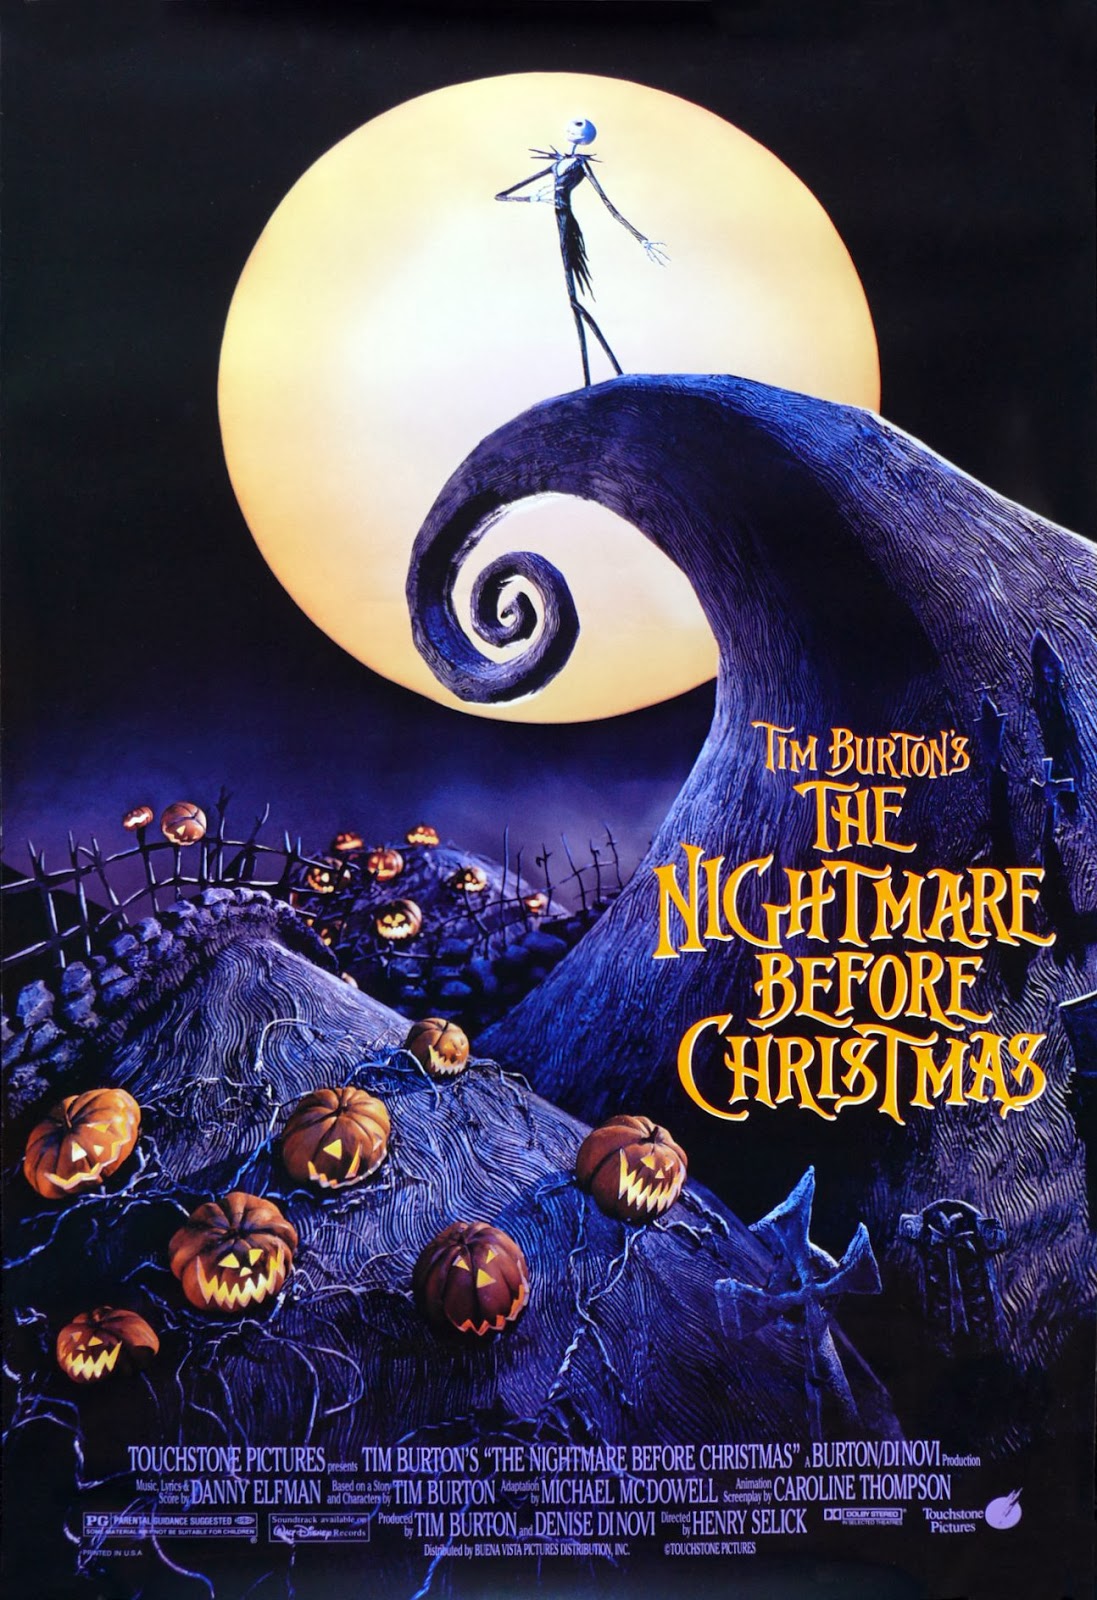 To Hollywood With Love My Obsession With Films The Nightmare Before Christmas 4d 邦題 ナイトメアー ビフォア クリスマス ディズニー4d